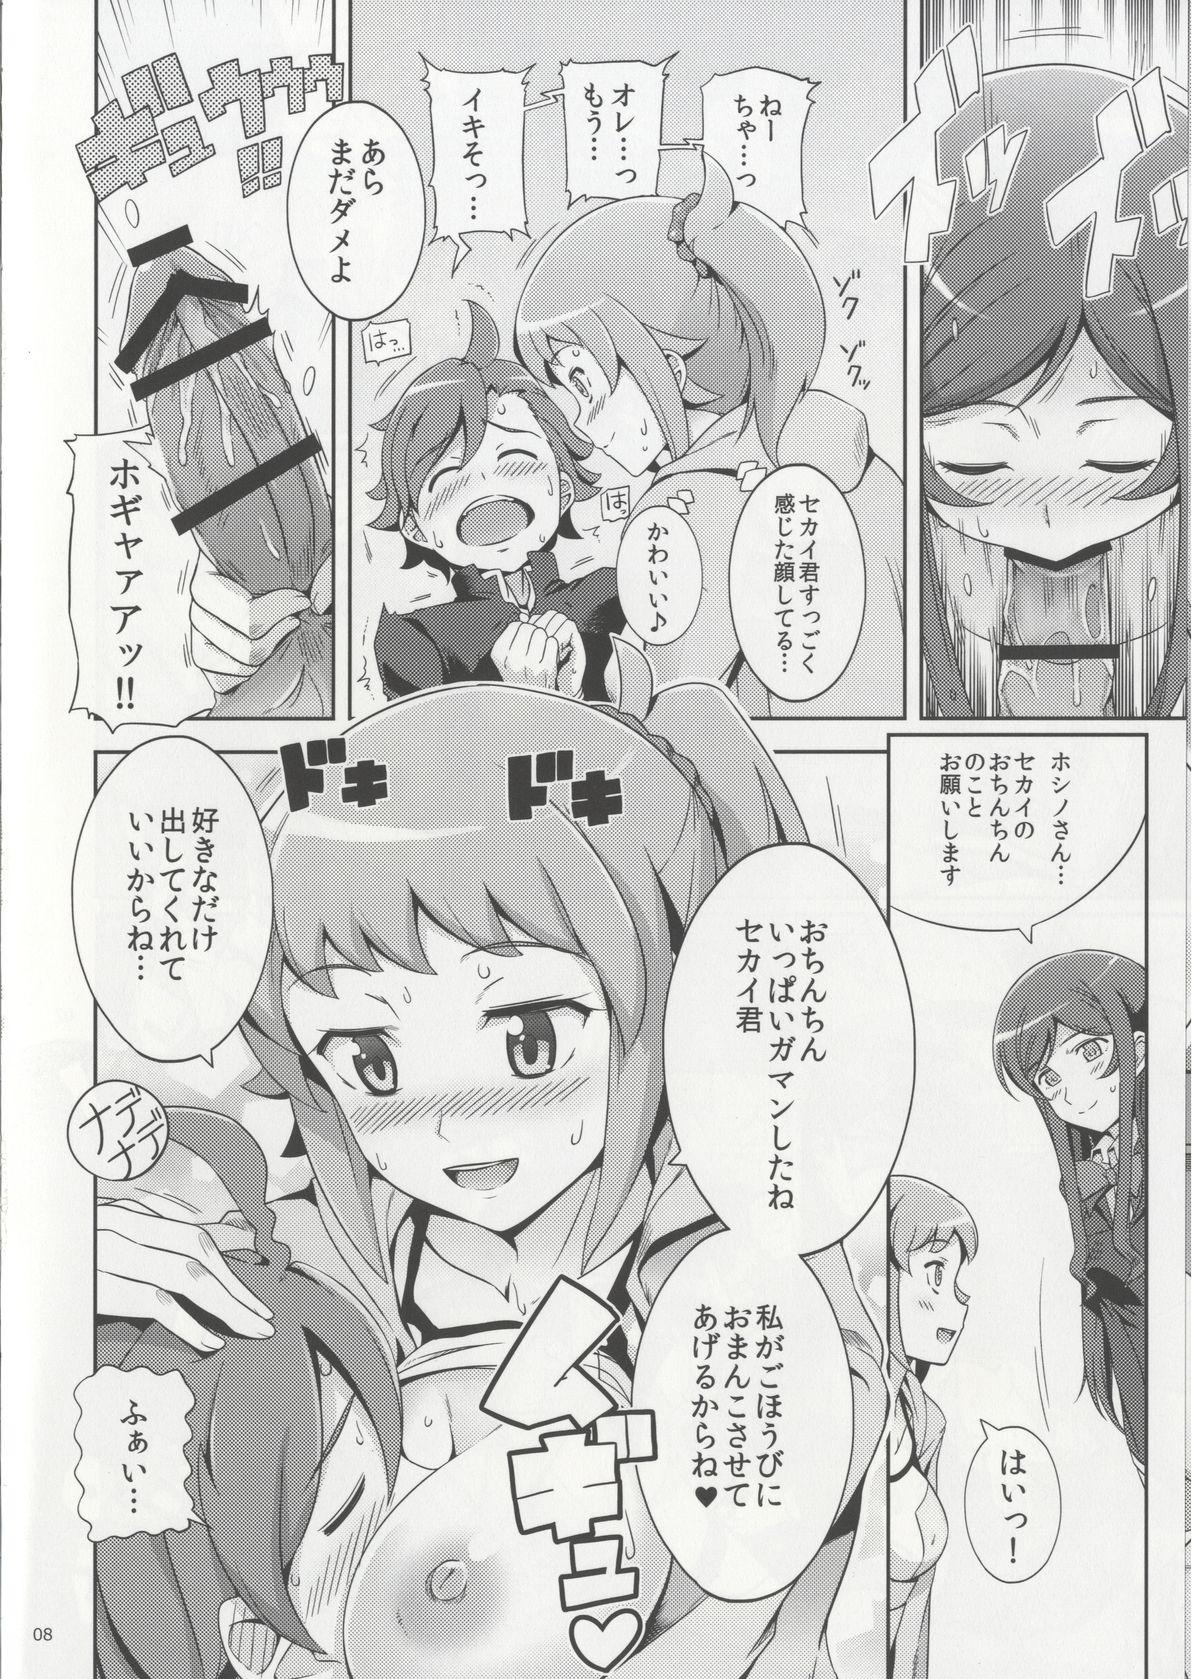 Speculum Namahame Try! - Gundam build fighters try Shower - Page 8